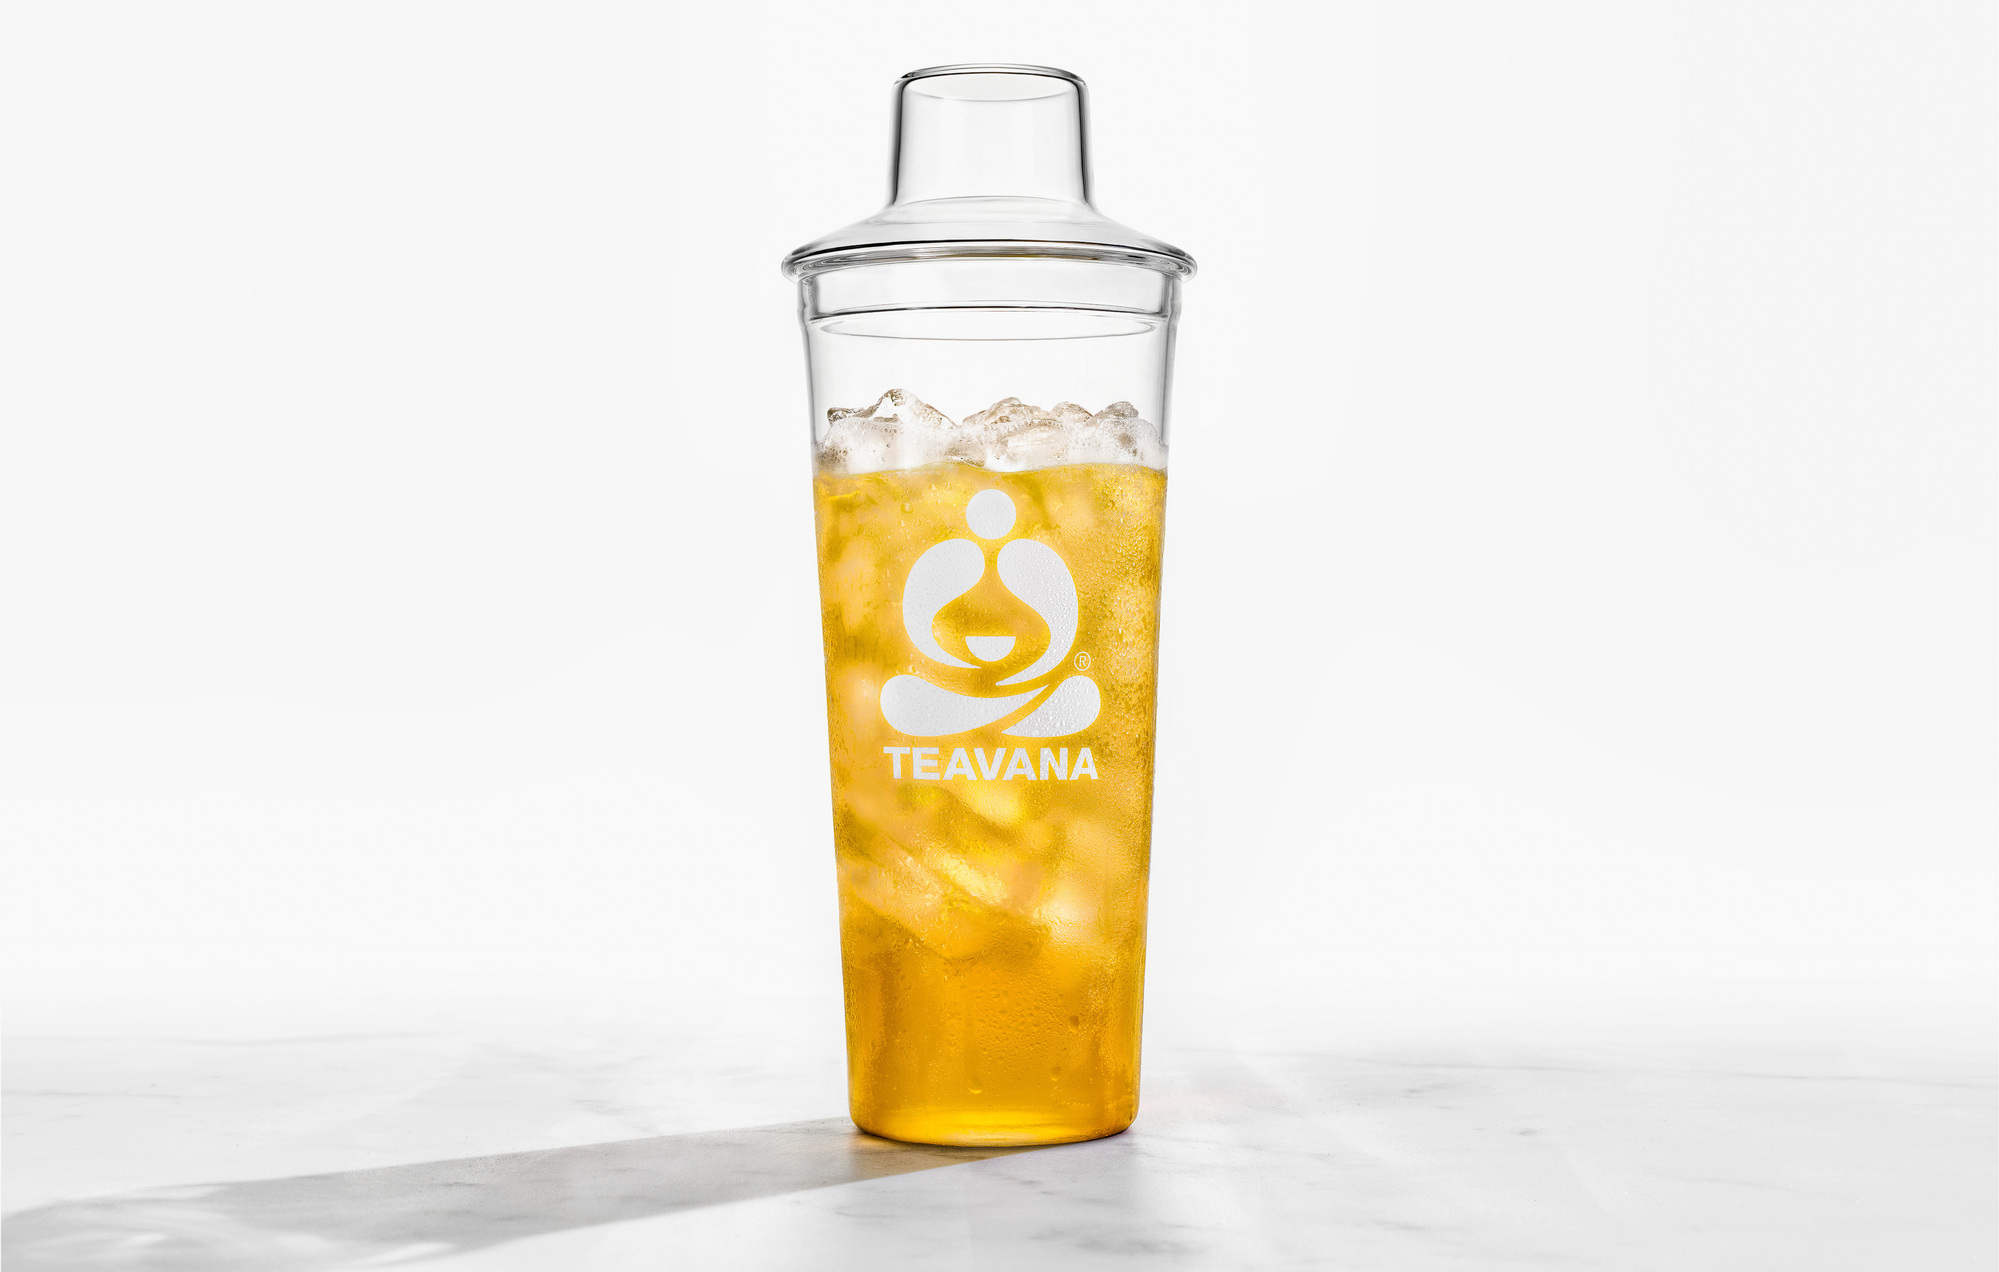 Teavana product advertising photography by beverage and drinks photographer Timothy Hogan in Los Angeles